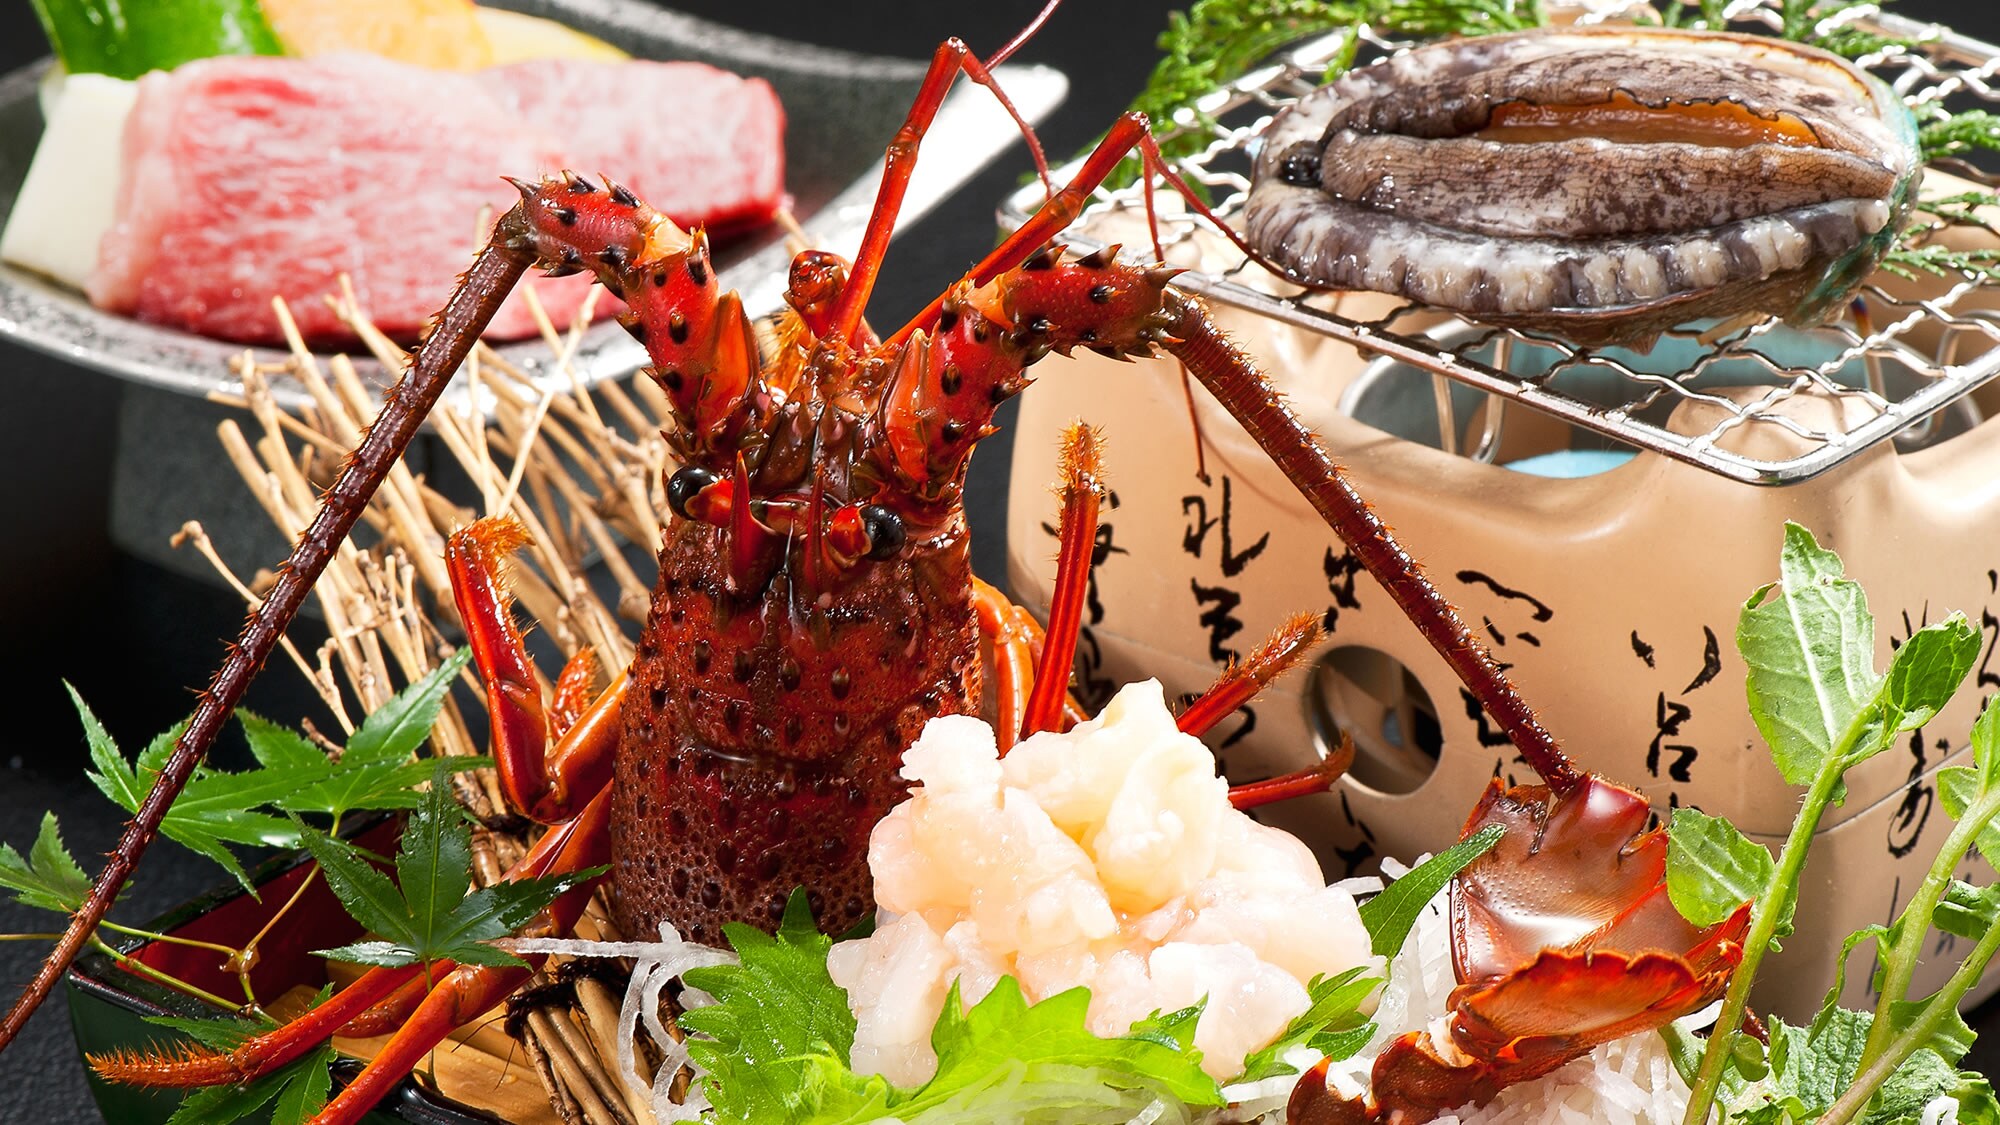 Inn recommended DX! Spiny lobster sashimi, abalone dance grilled, with special Wagyu beef